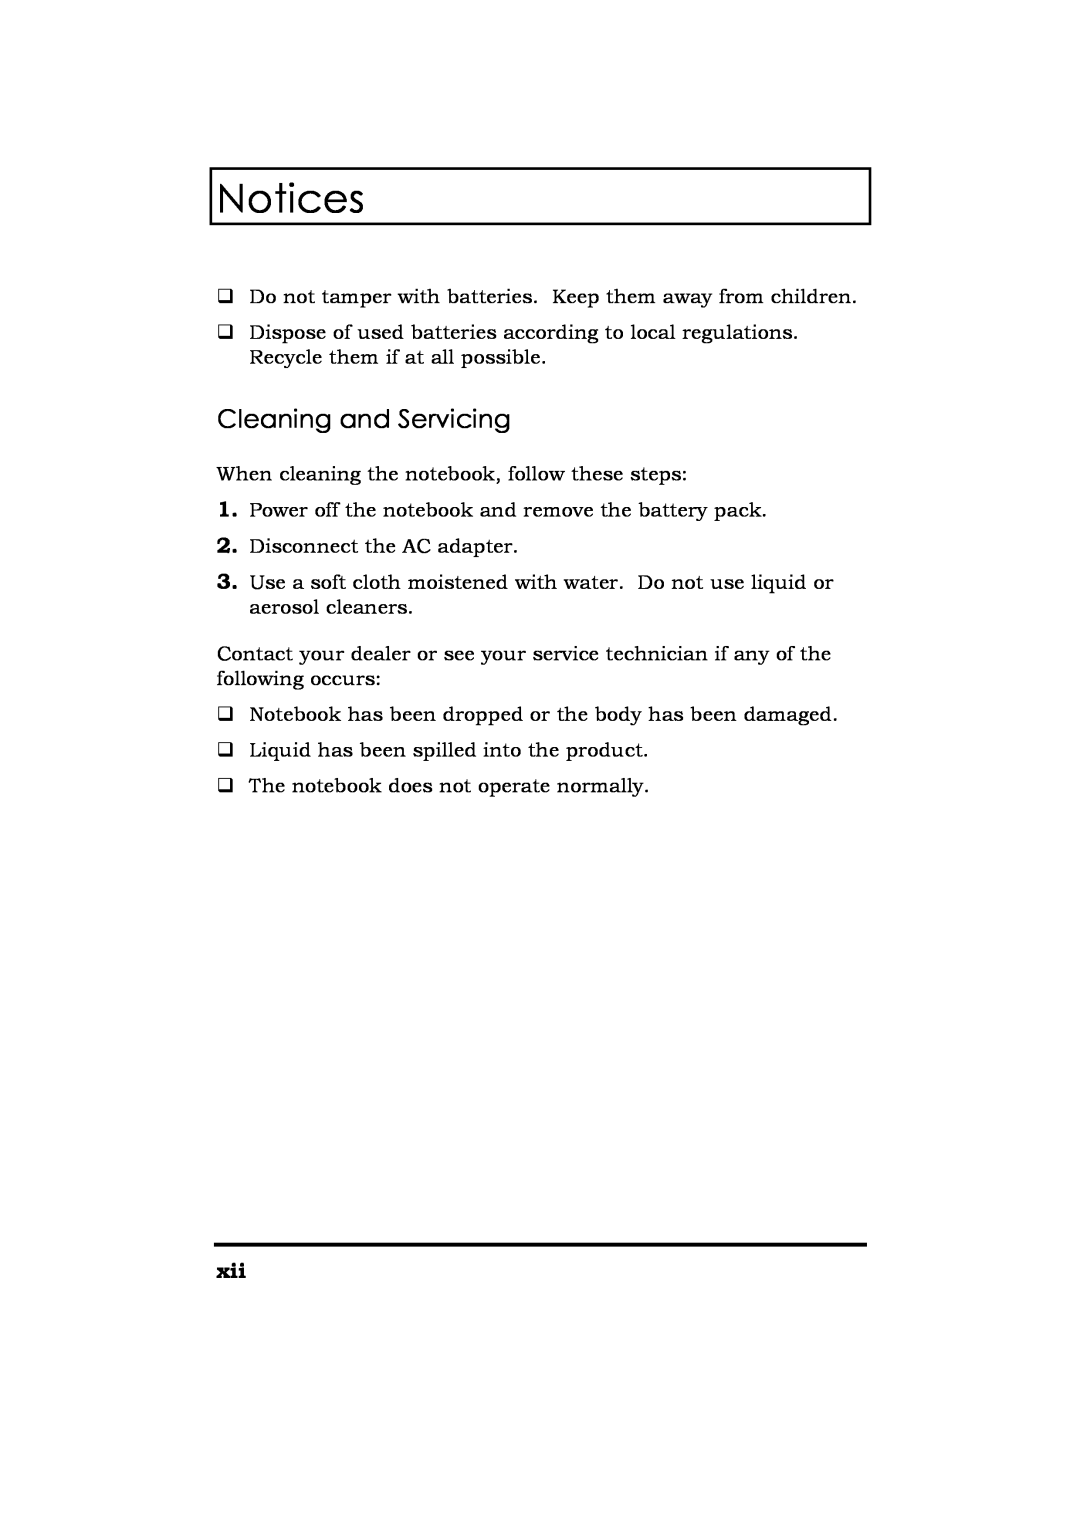 Acer Extensa 365 manual Cleaning and Servicing, Notices 